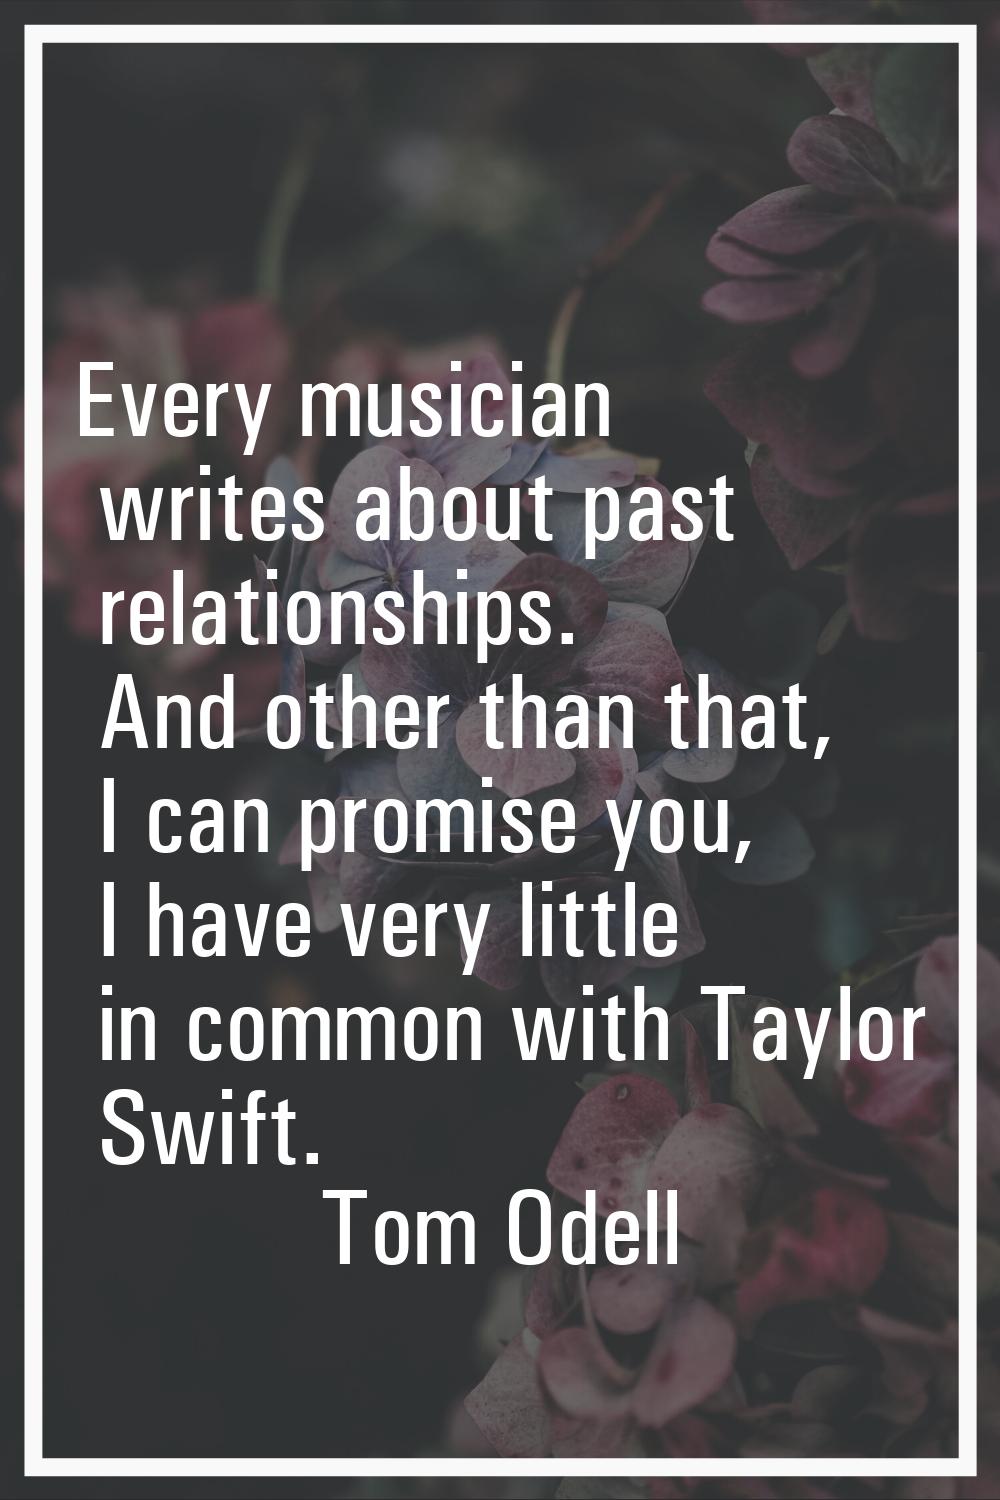 Every musician writes about past relationships. And other than that, I can promise you, I have very